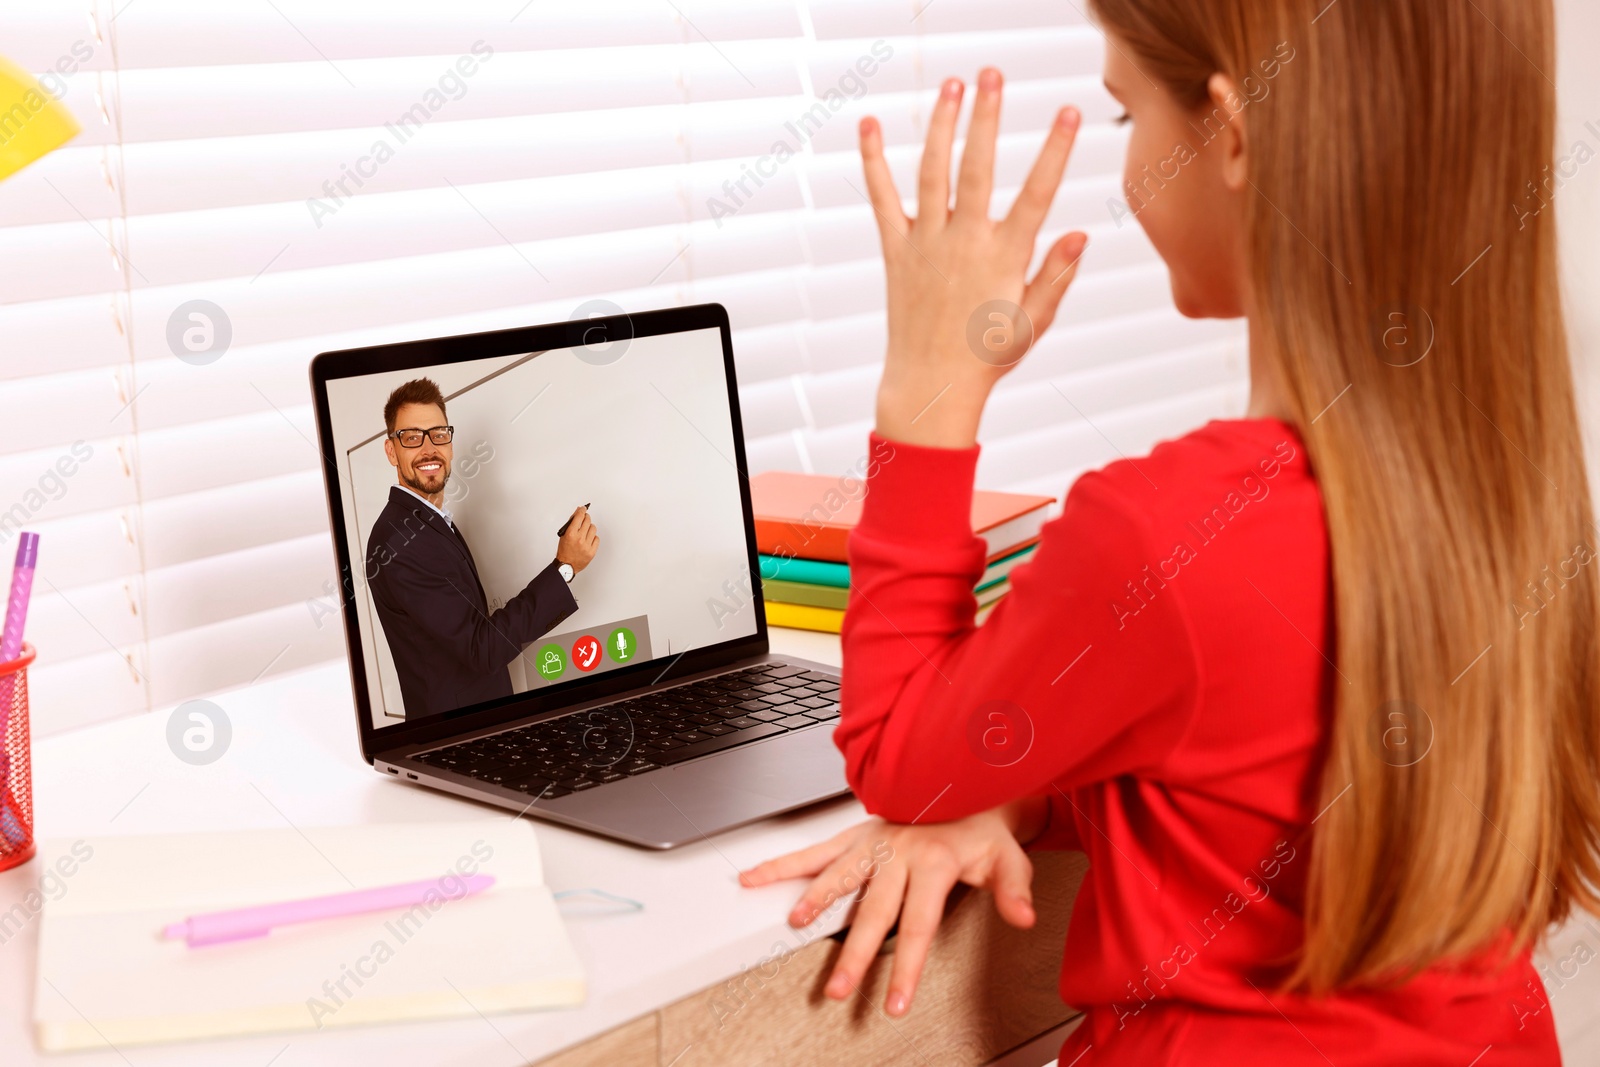 Image of E-learning. Little girl raising her hand to answer during online lesson at table indoors